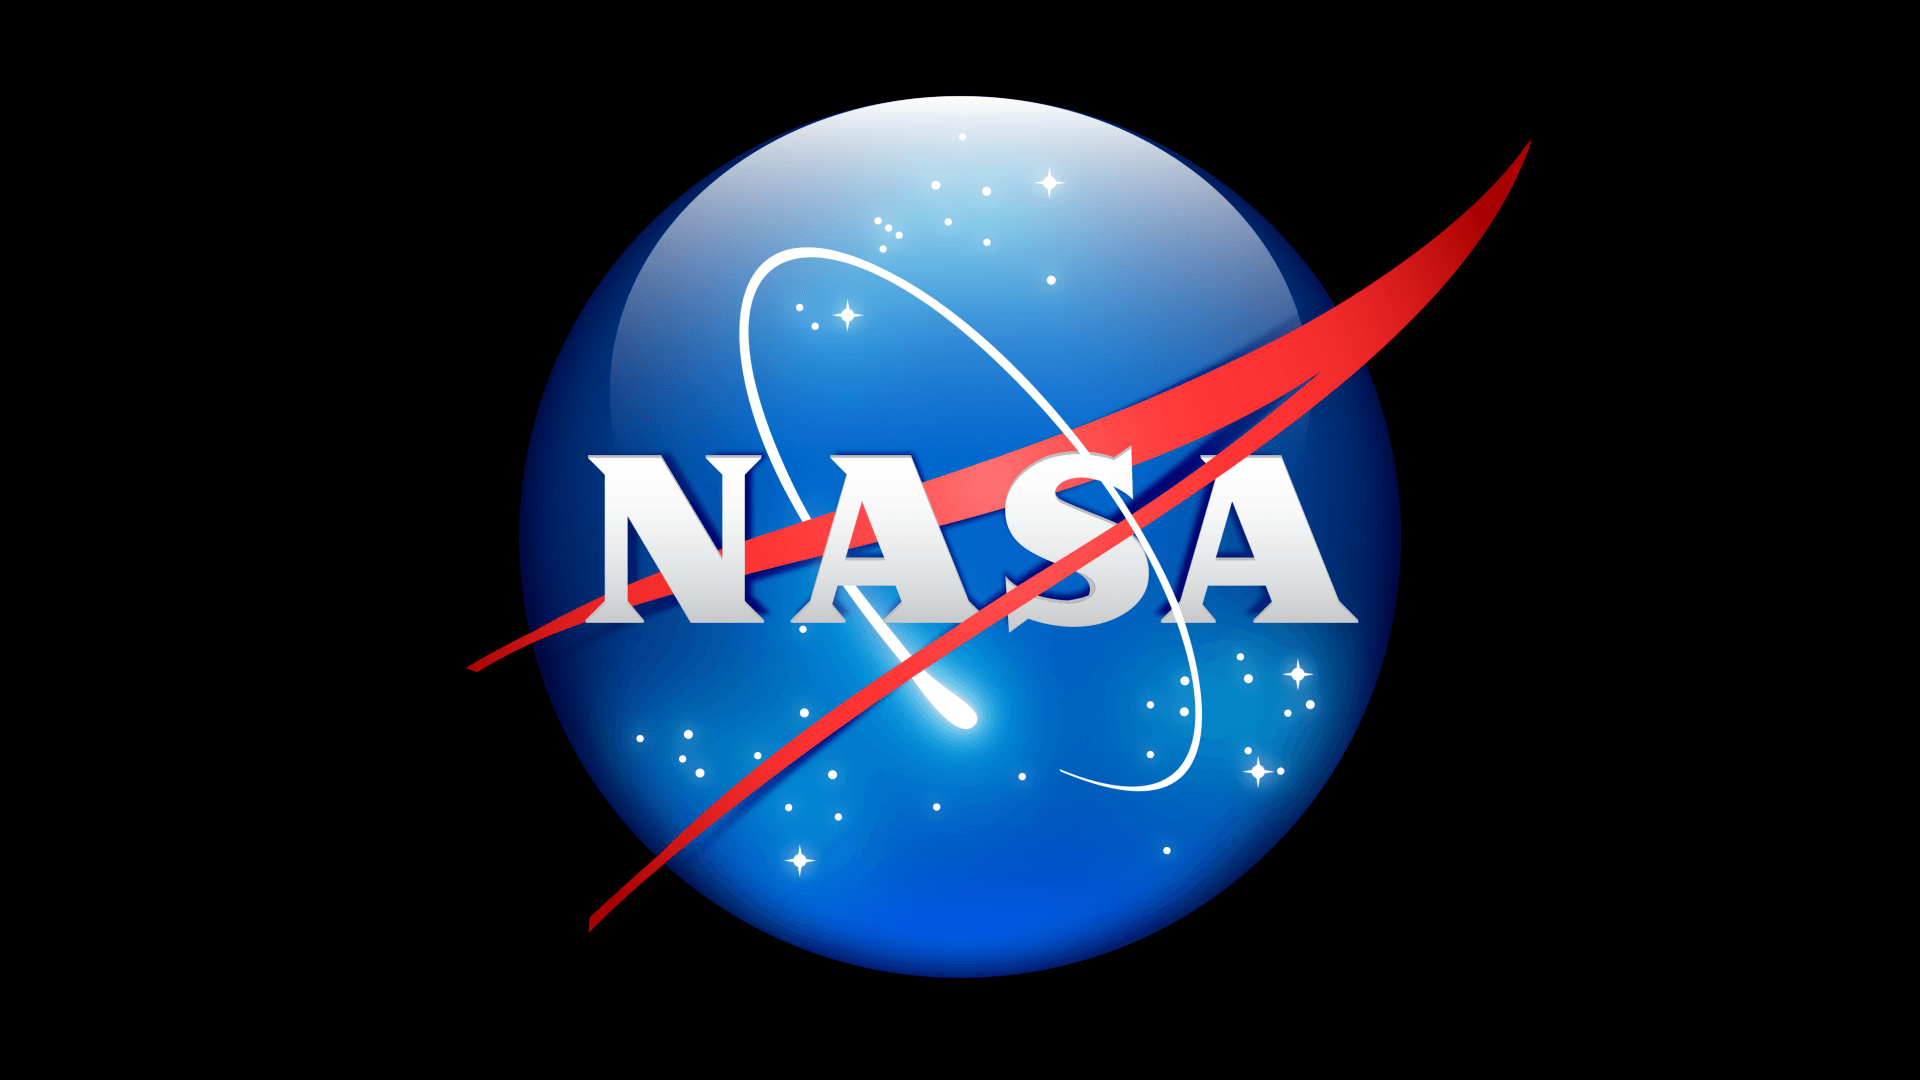 Use of NASA Logo - NASA Files Patent For Amorphous Amoeba Robots To Use In Space